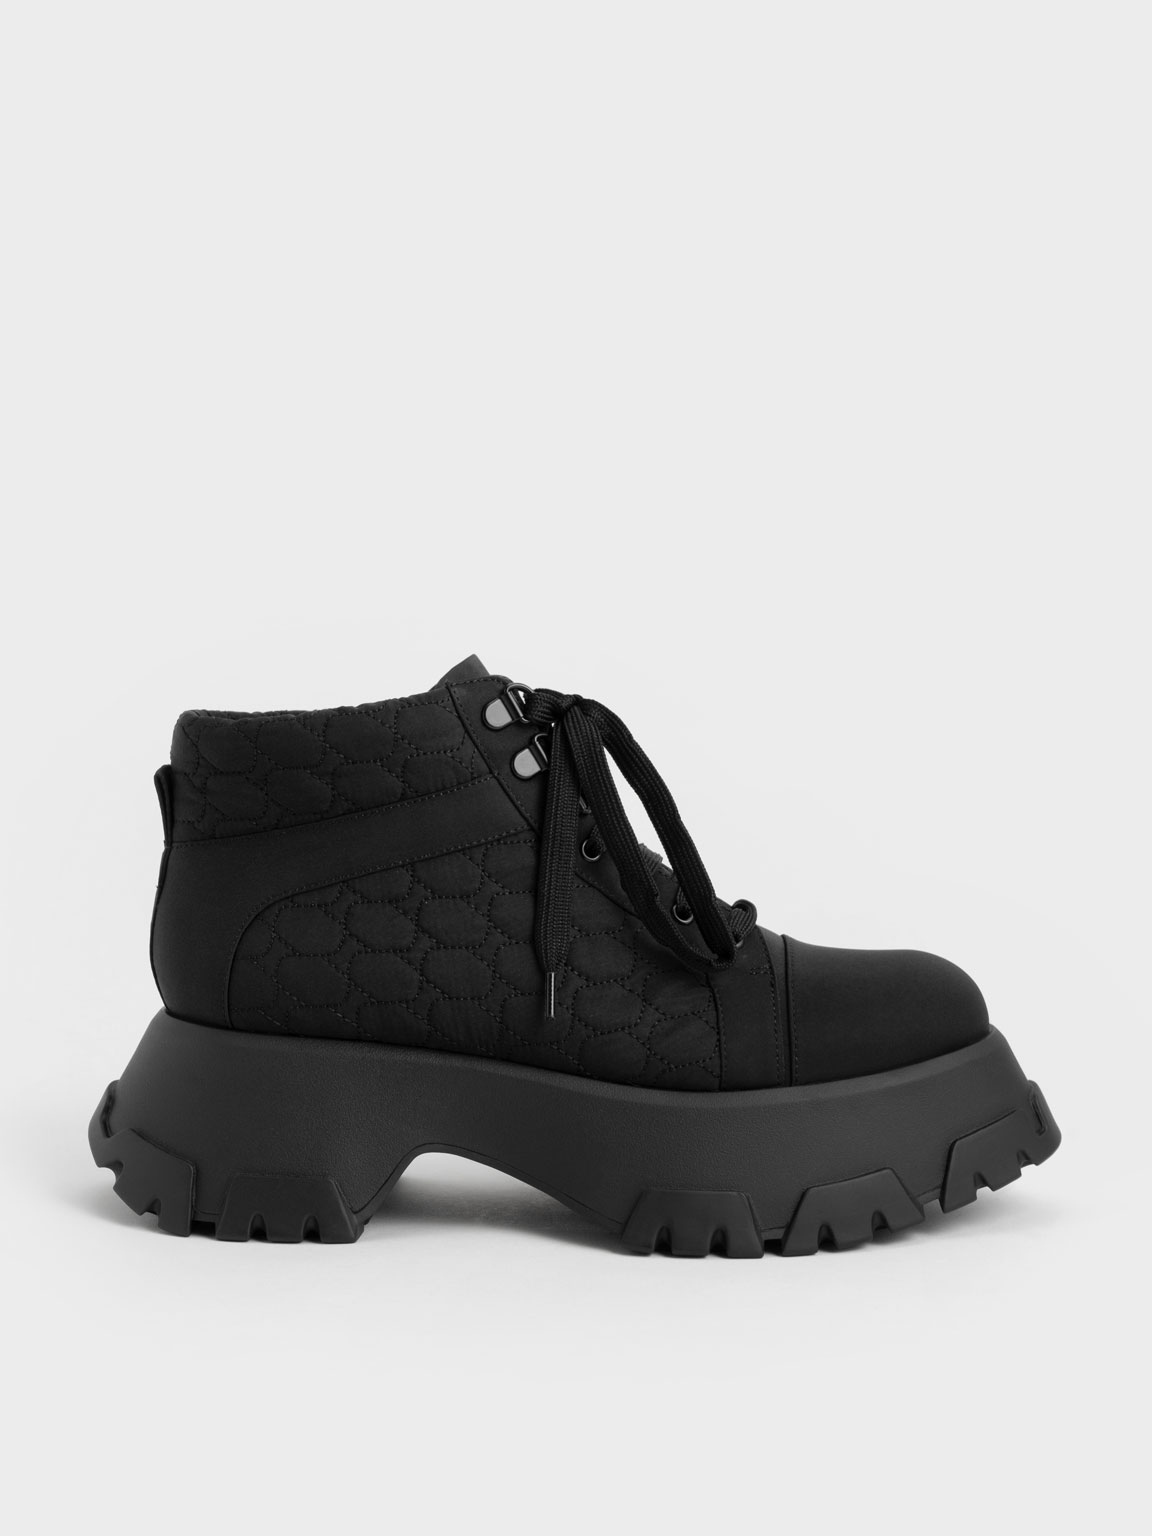 Black Recycled Polyester High-Top Sneakers - CHARLES & KEITH AE